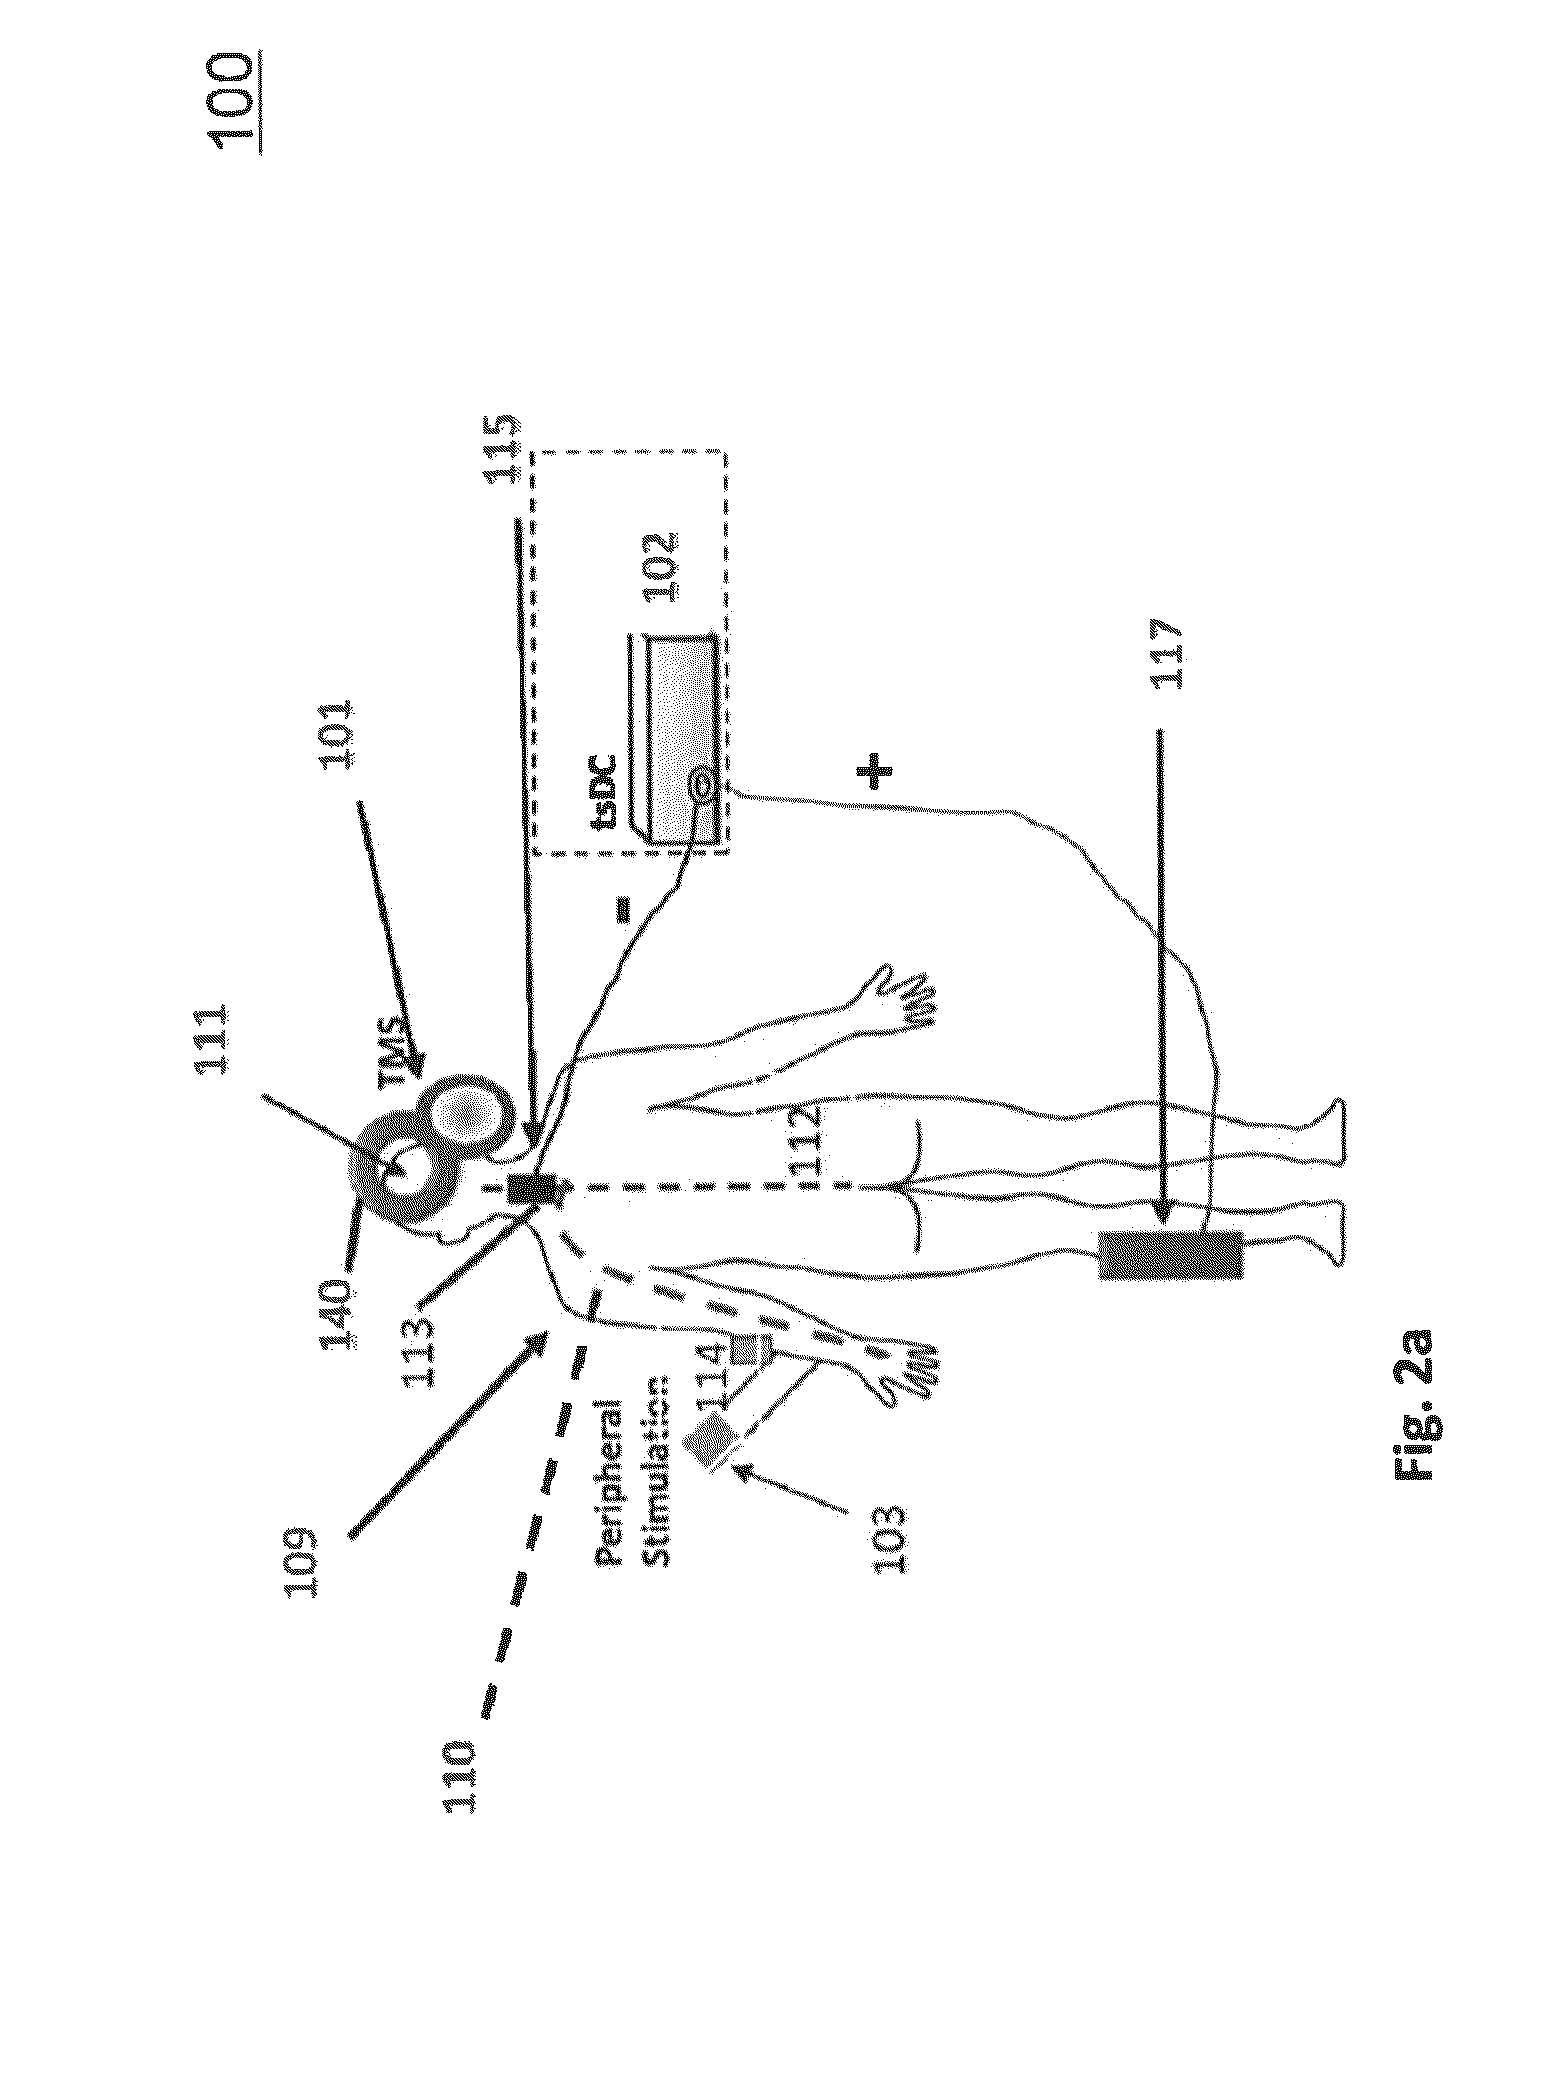 Method and system for treatment of neuromotor dysfunction